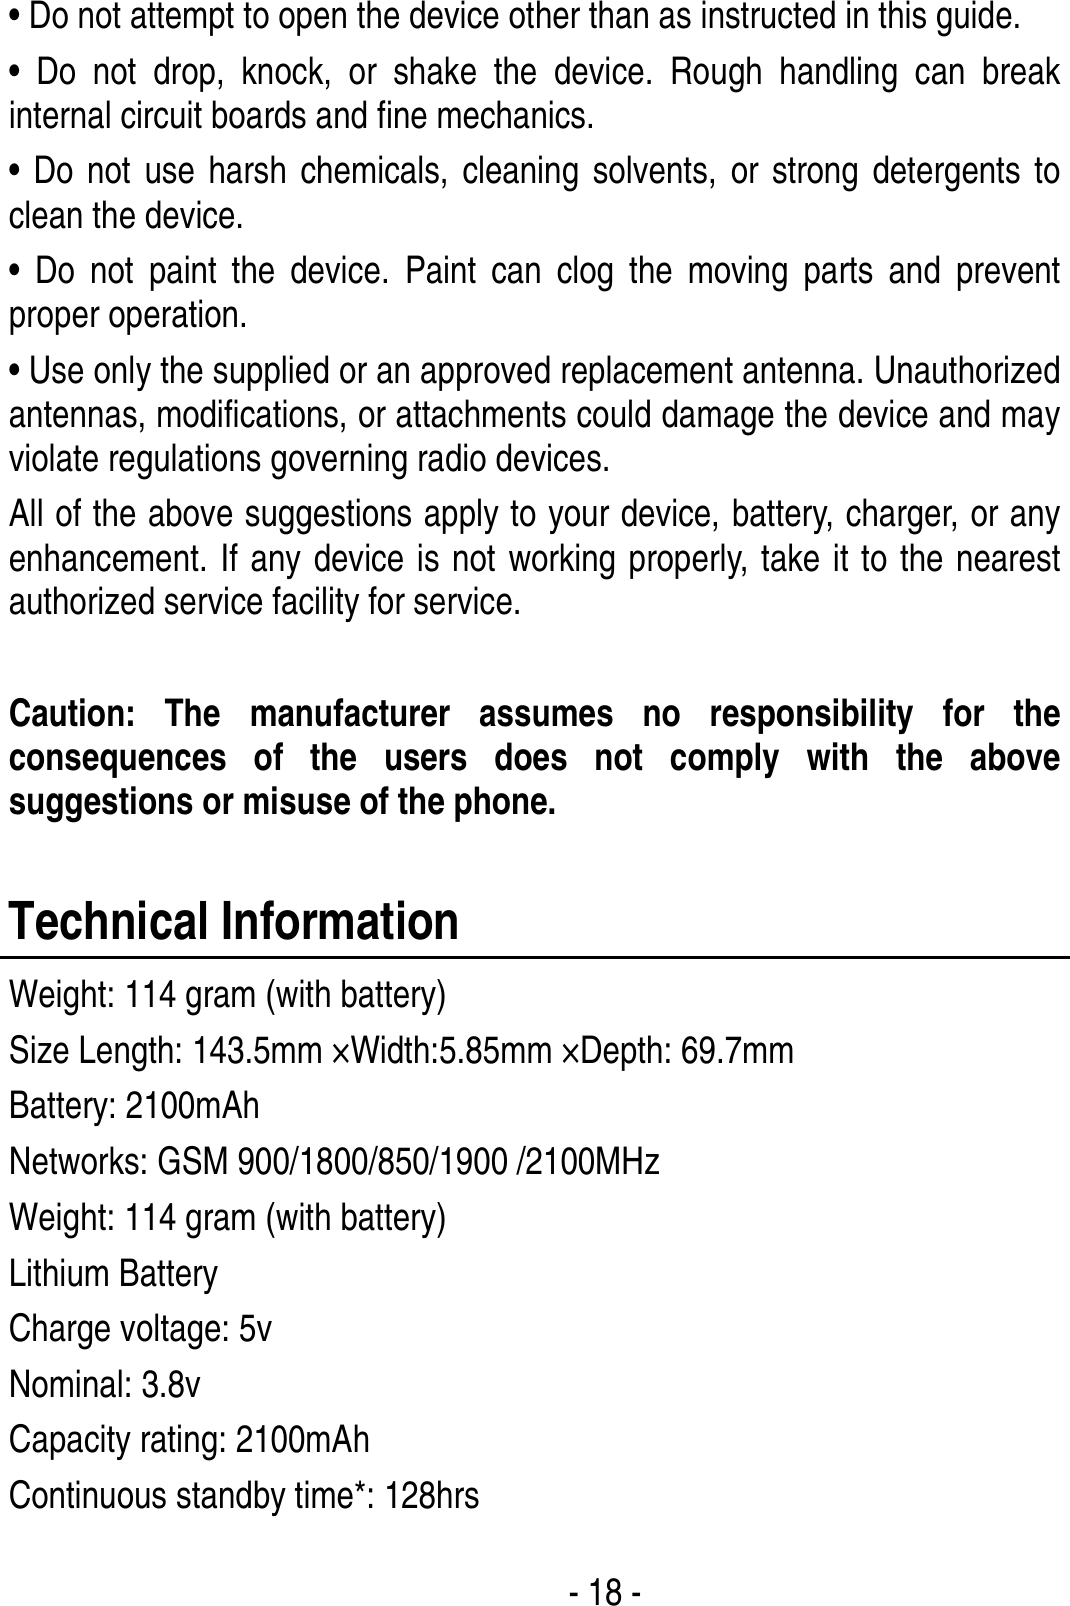  - 18 - • Do not attempt to open the device other than as instructed in this guide. • Do not drop, knock, or shake the device. Rough handling can break internal circuit boards and fine mechanics. • Do not use harsh chemicals, cleaning solvents, or strong detergents to clean the device. • Do not paint the device. Paint can clog the moving parts and prevent proper operation. • Use only the supplied or an approved replacement antenna. Unauthorized antennas, modifications, or attachments could damage the device and may violate regulations governing radio devices. All of the above suggestions apply to your device, battery, charger, or any enhancement. If any device is not working properly, take it to the nearest authorized service facility for service.  Caution: The manufacturer assumes no responsibility for the consequences of the users does not comply with the above suggestions or misuse of the phone.  Technical Information Weight: 114 gram (with battery) Size Length: 143.5mm ×Width:5.85mm ×Depth: 69.7mm Battery: 2100mAh Networks: GSM 900/1800/850/1900 /2100MHz Weight: 114 gram (with battery) Lithium Battery Charge voltage: 5v Nominal: 3.8v Capacity rating: 2100mAh Continuous standby time*: 128hrs 